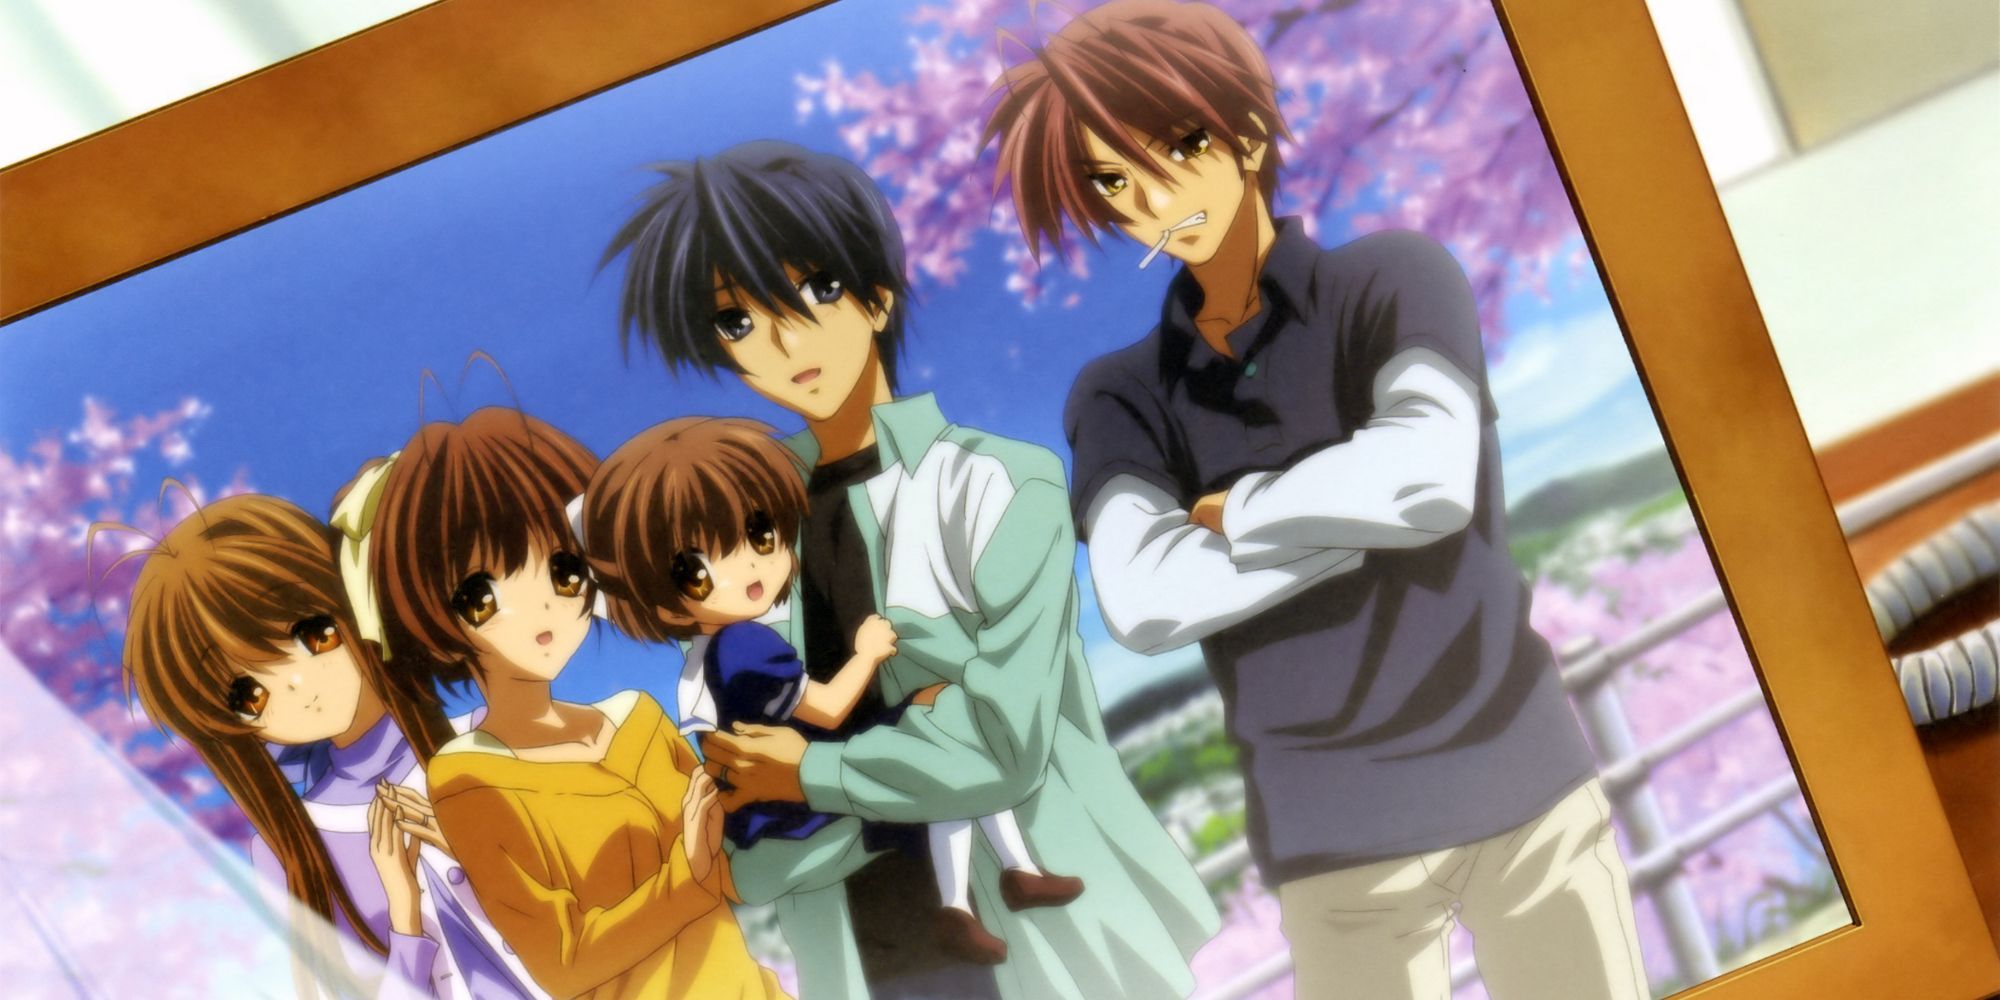 Framed photograph of the main characters from Clannad: After Story